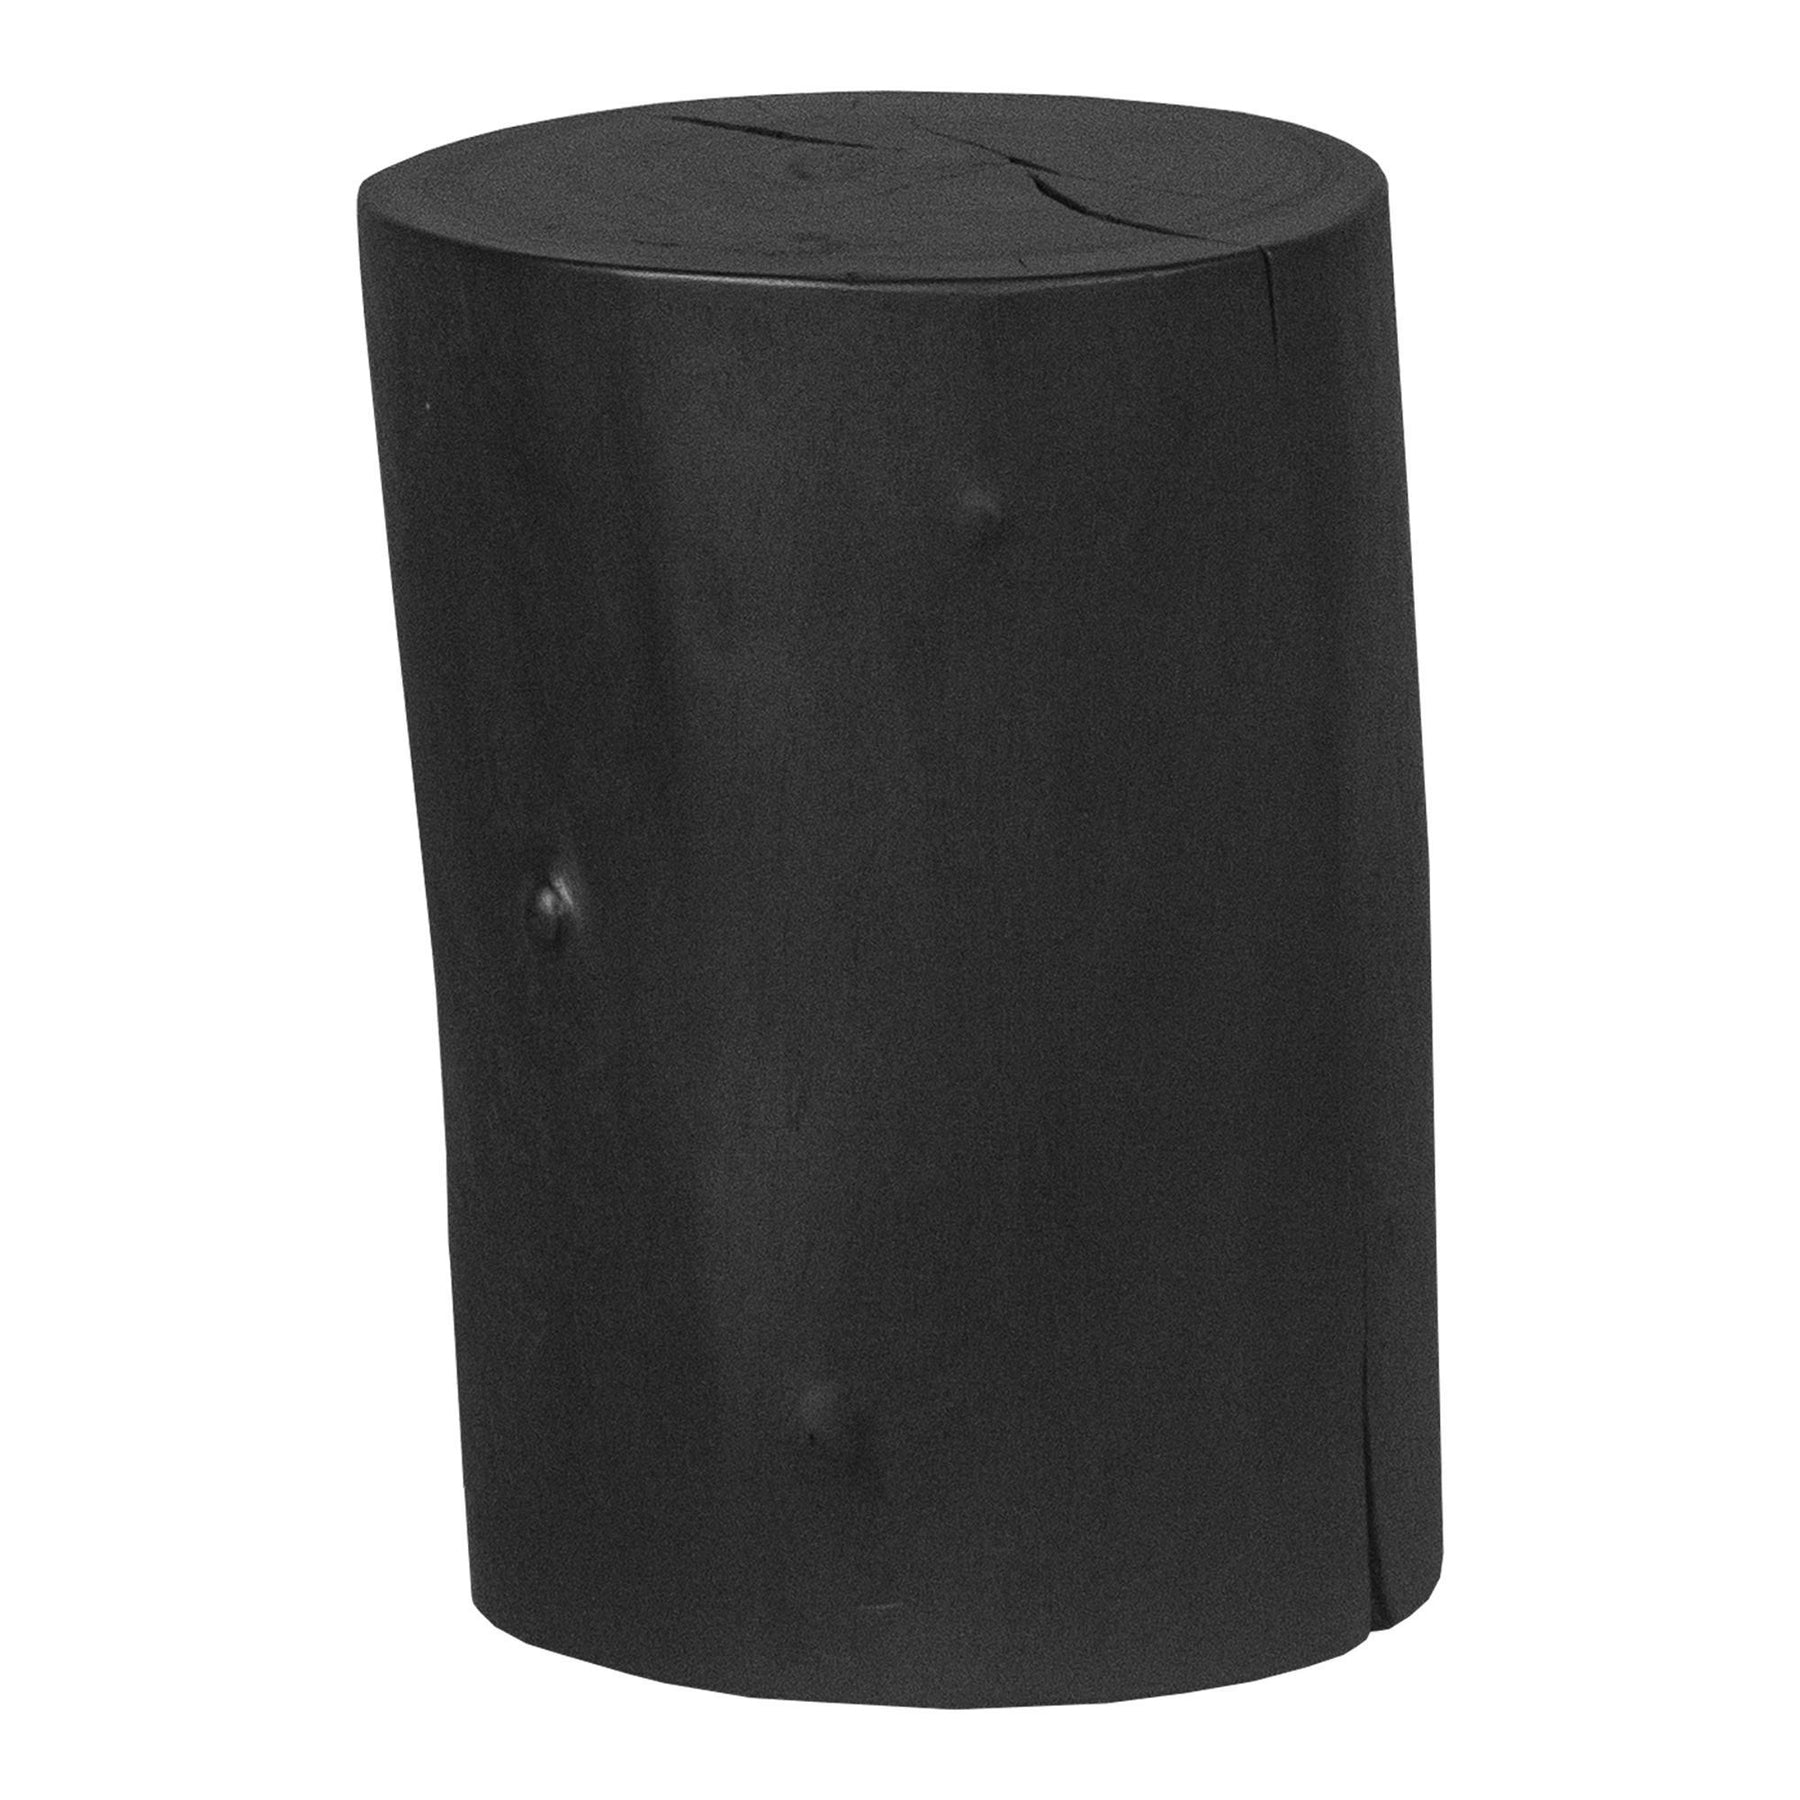 Moe's Home Collection Dendra Accent Table Black - EI-1071-02